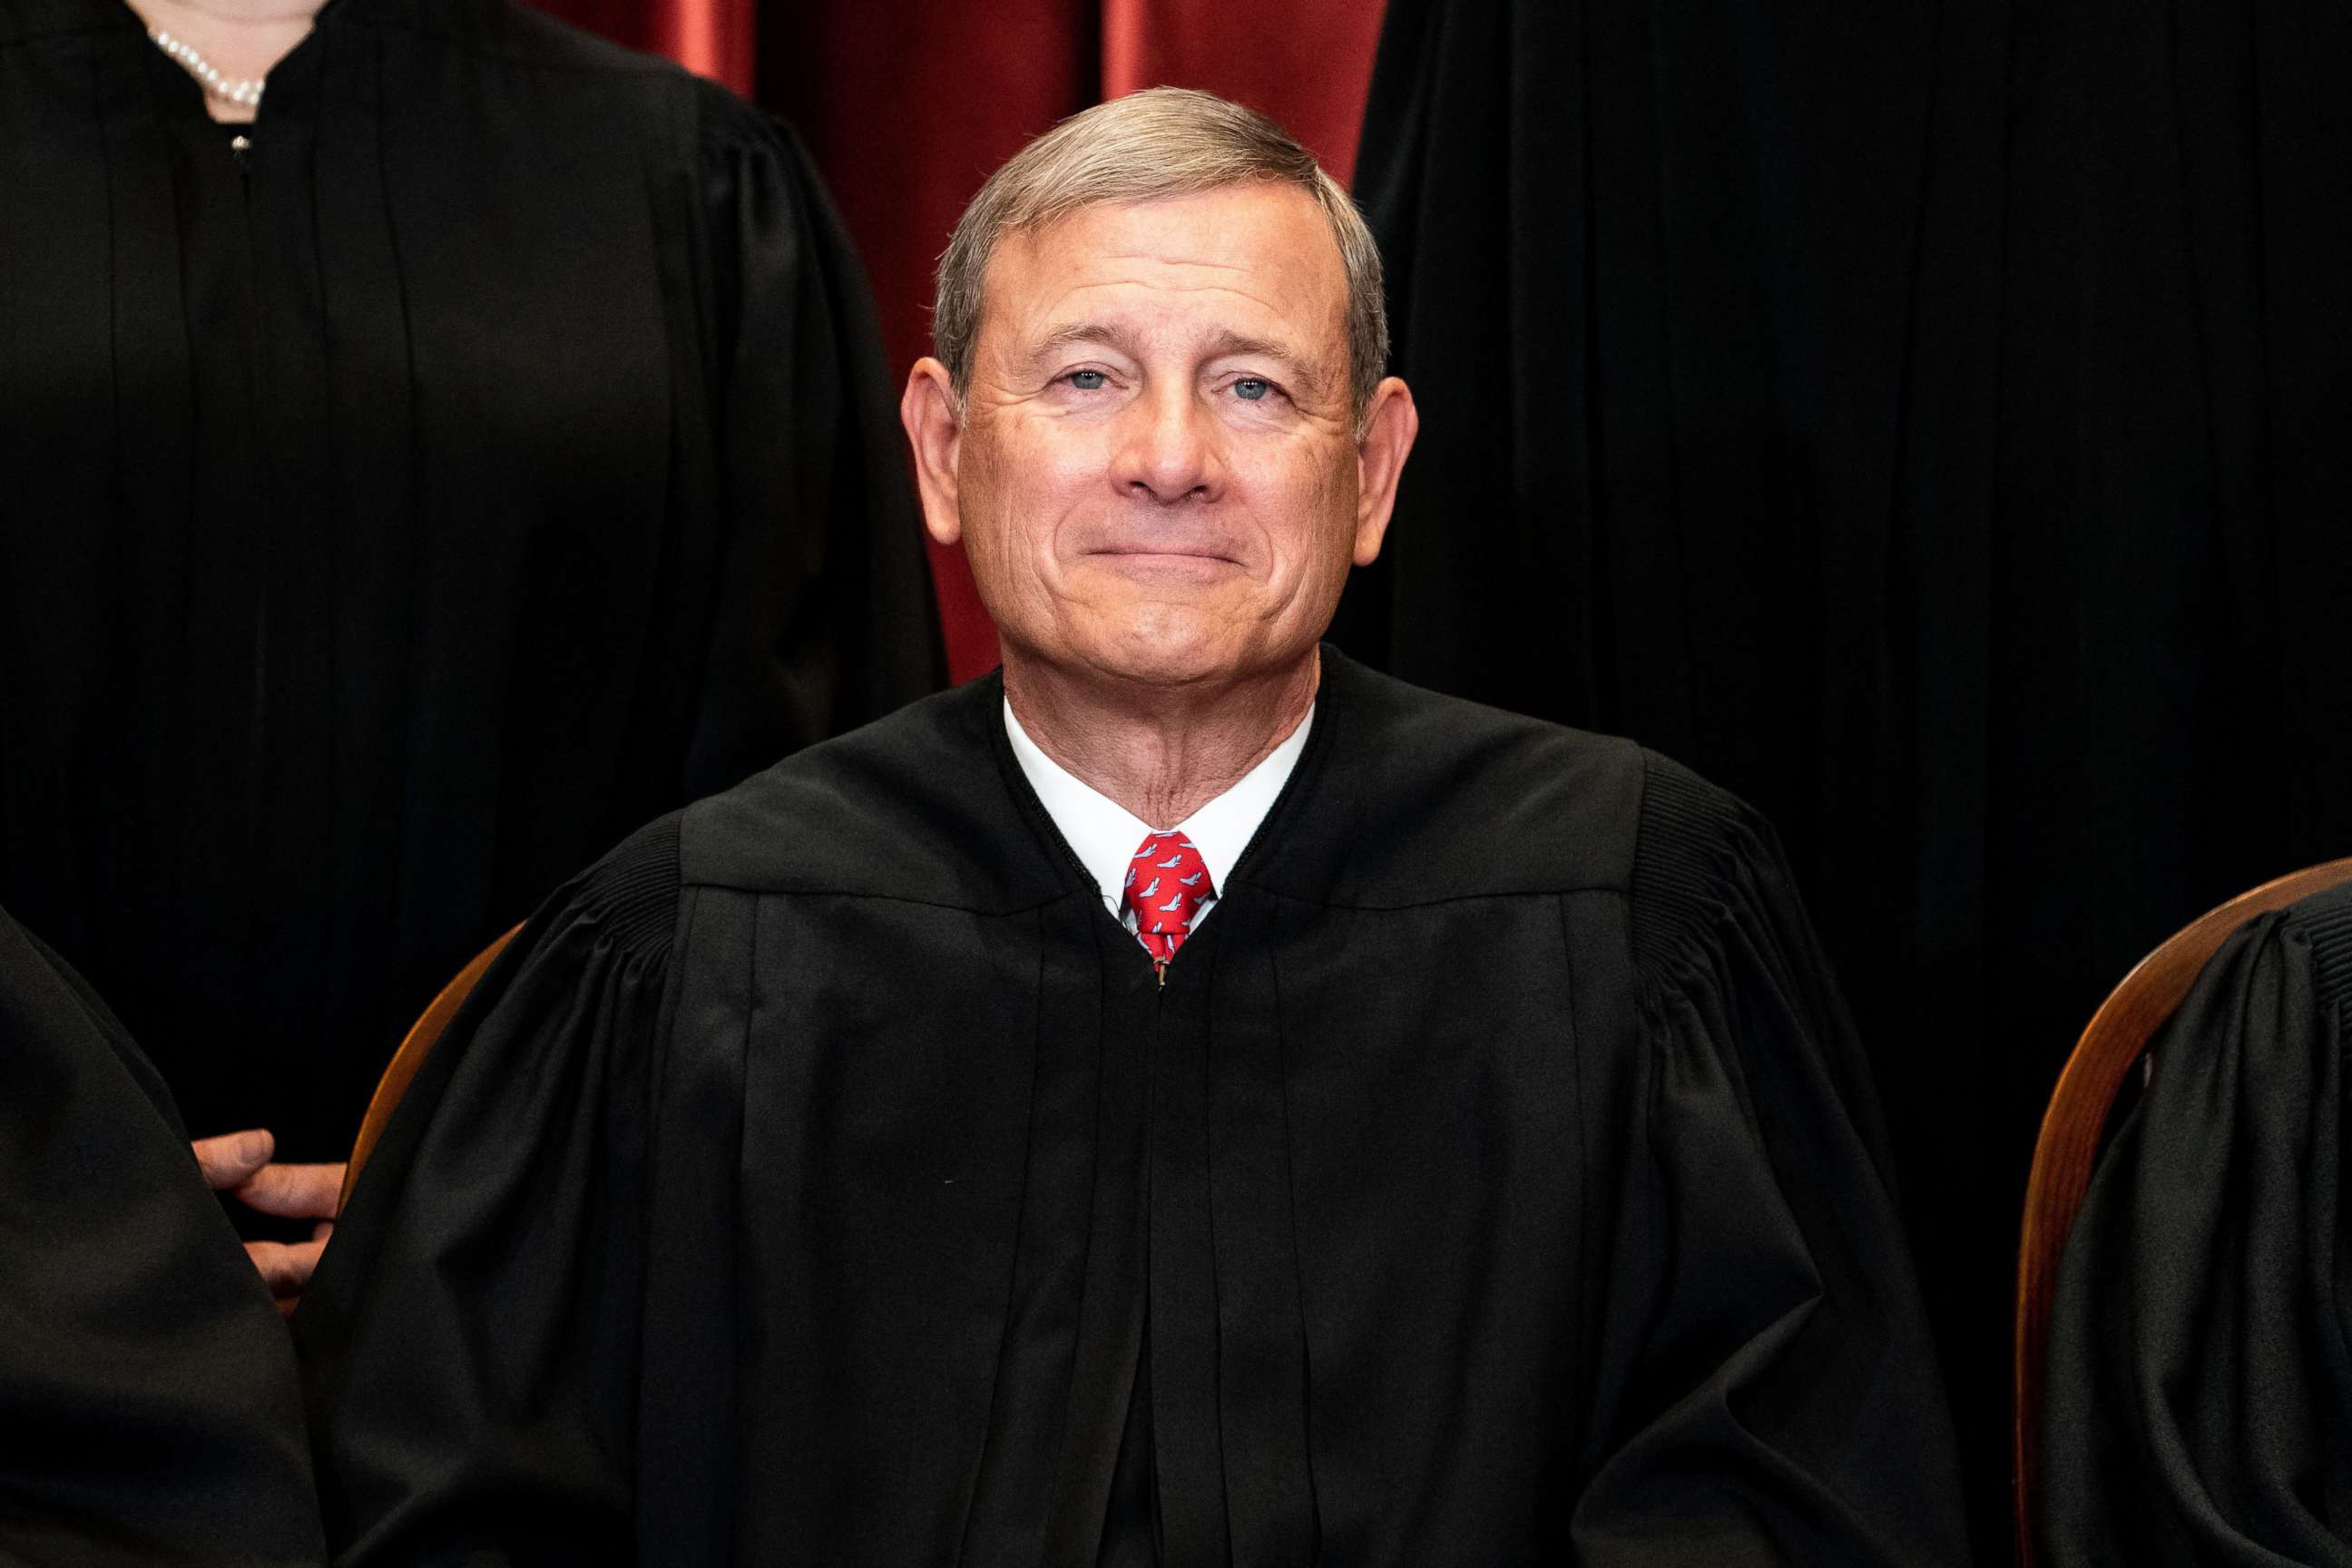 PHOTO: Chief Justice John Roberts sits during a group photo of the Justices at the Supreme Court in Washington, DC, April 23, 2021.